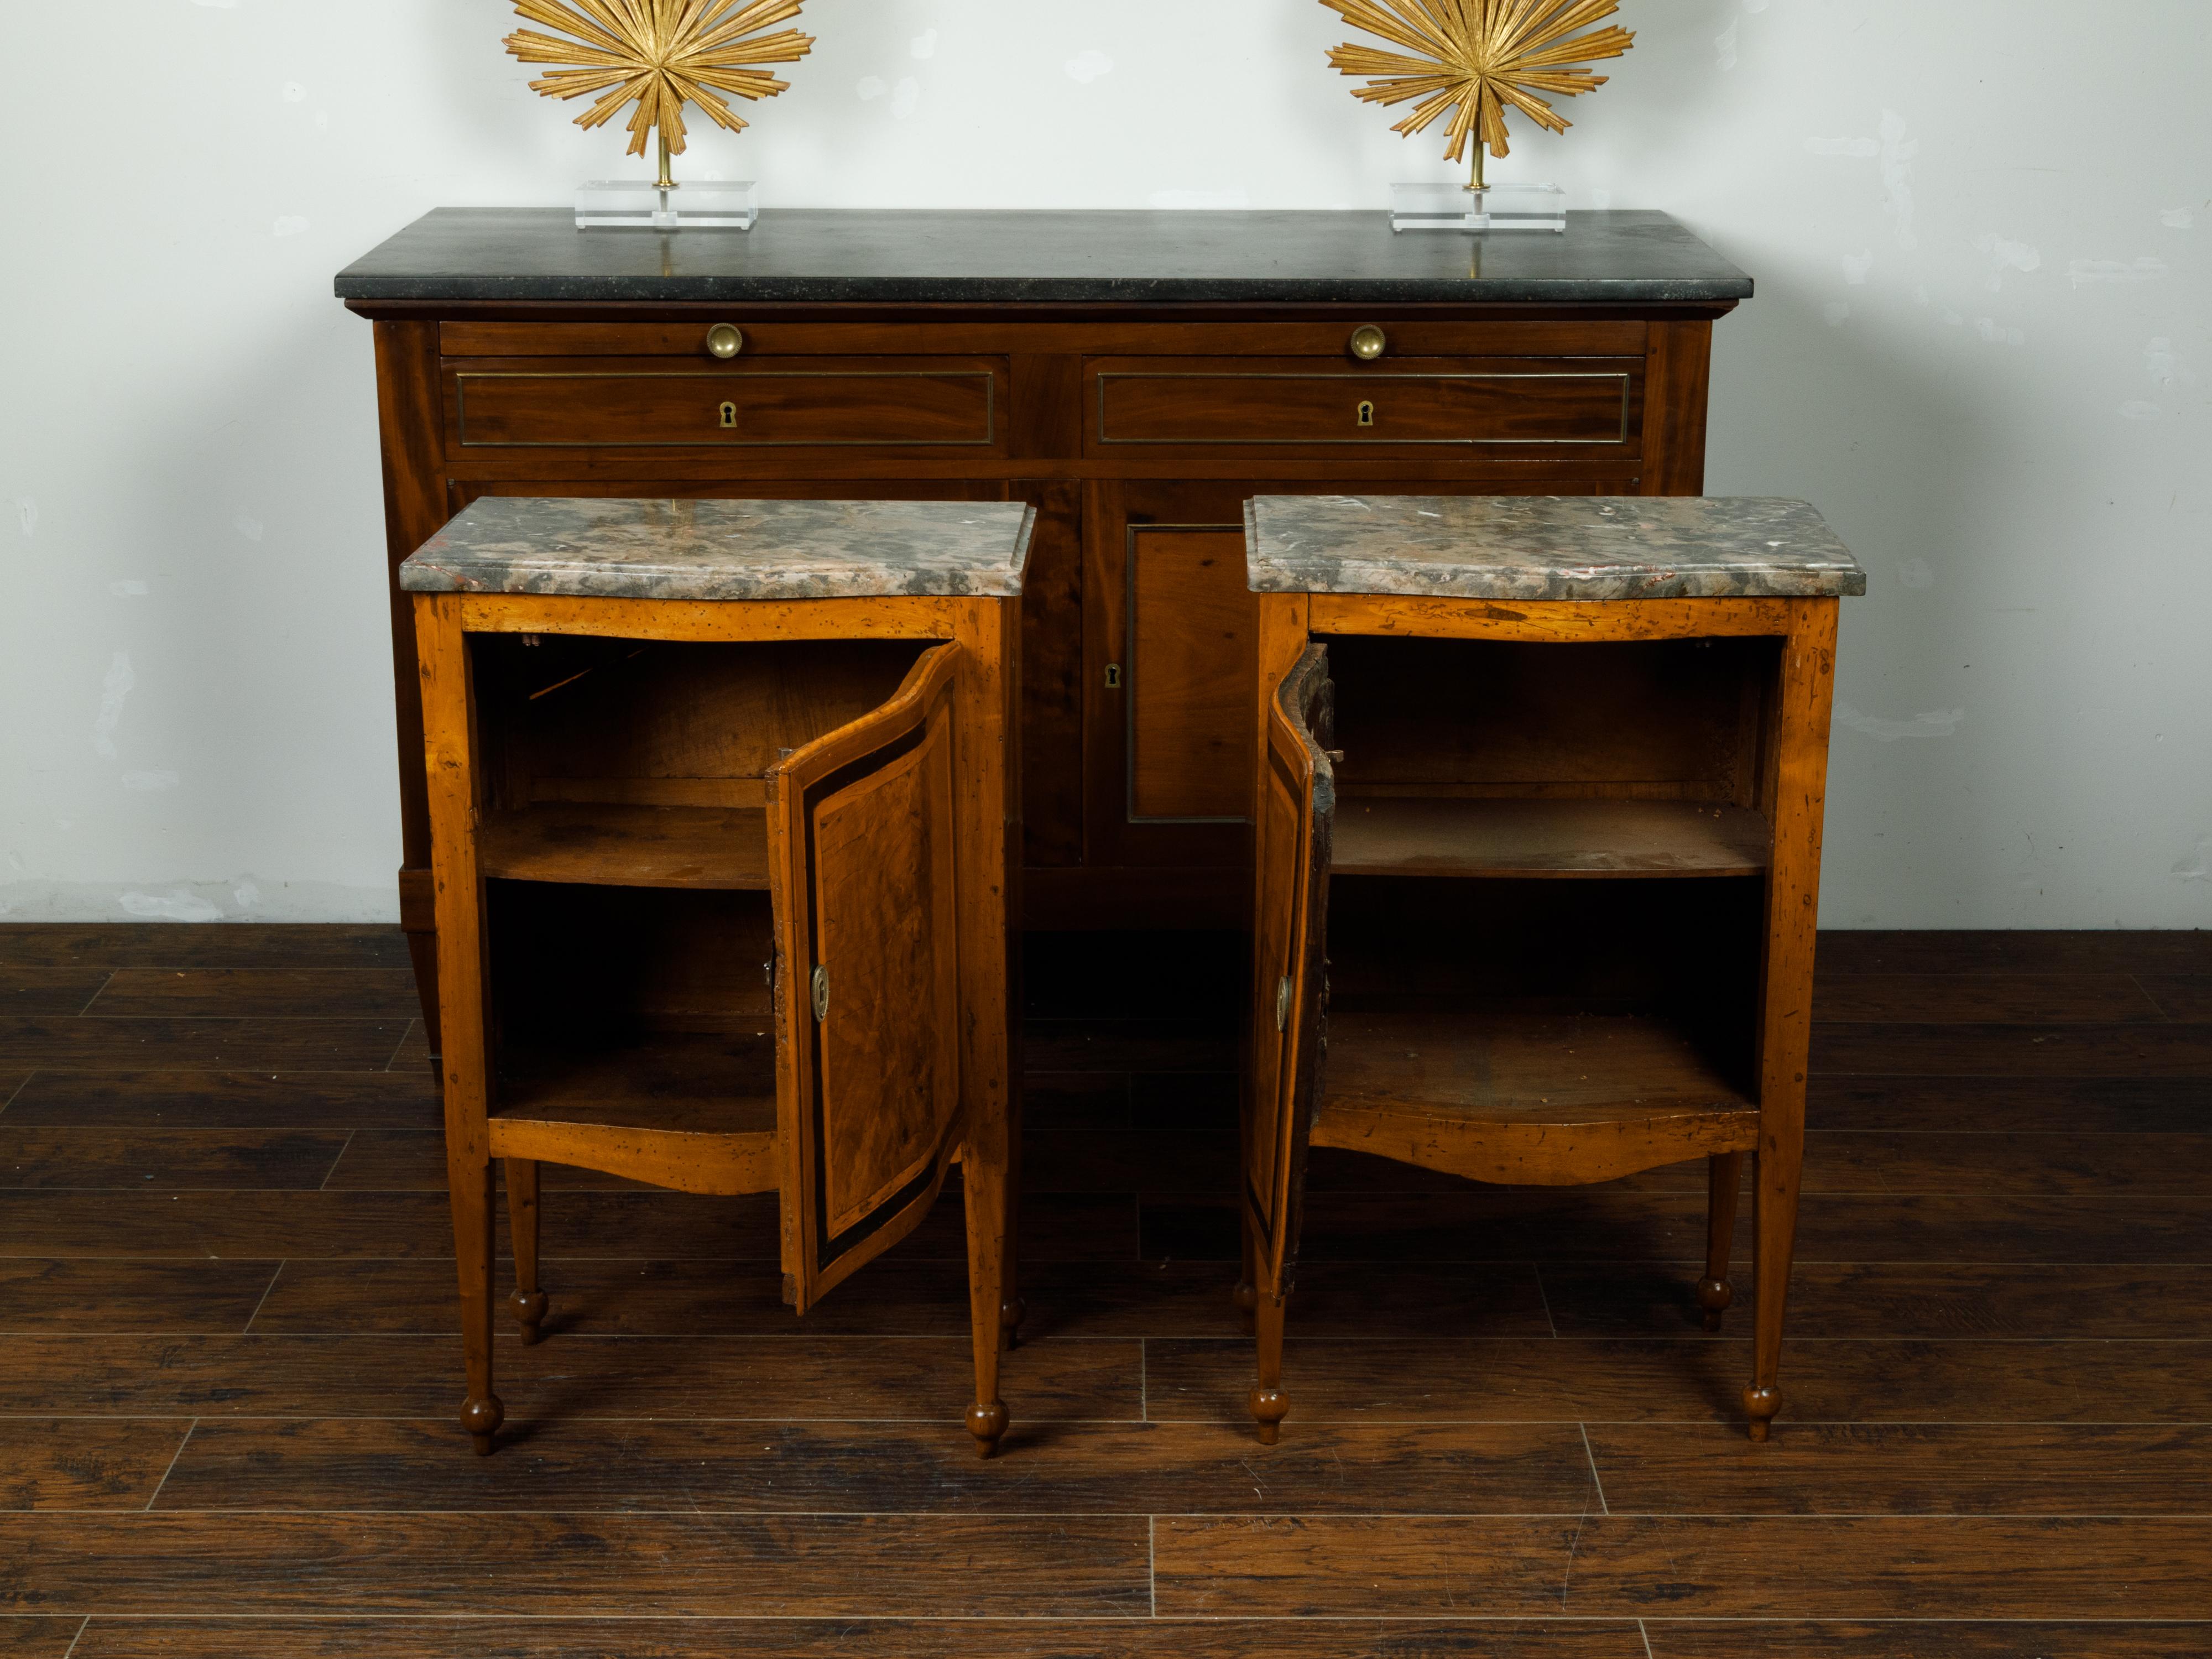 A pair of Italian walnut tables from the mid 19th century, with variegated marble top, single door and butterfly veneer. Created in Italy during the second quarter of the 19th century, each of this pair of walnut tables features a rectangular marble